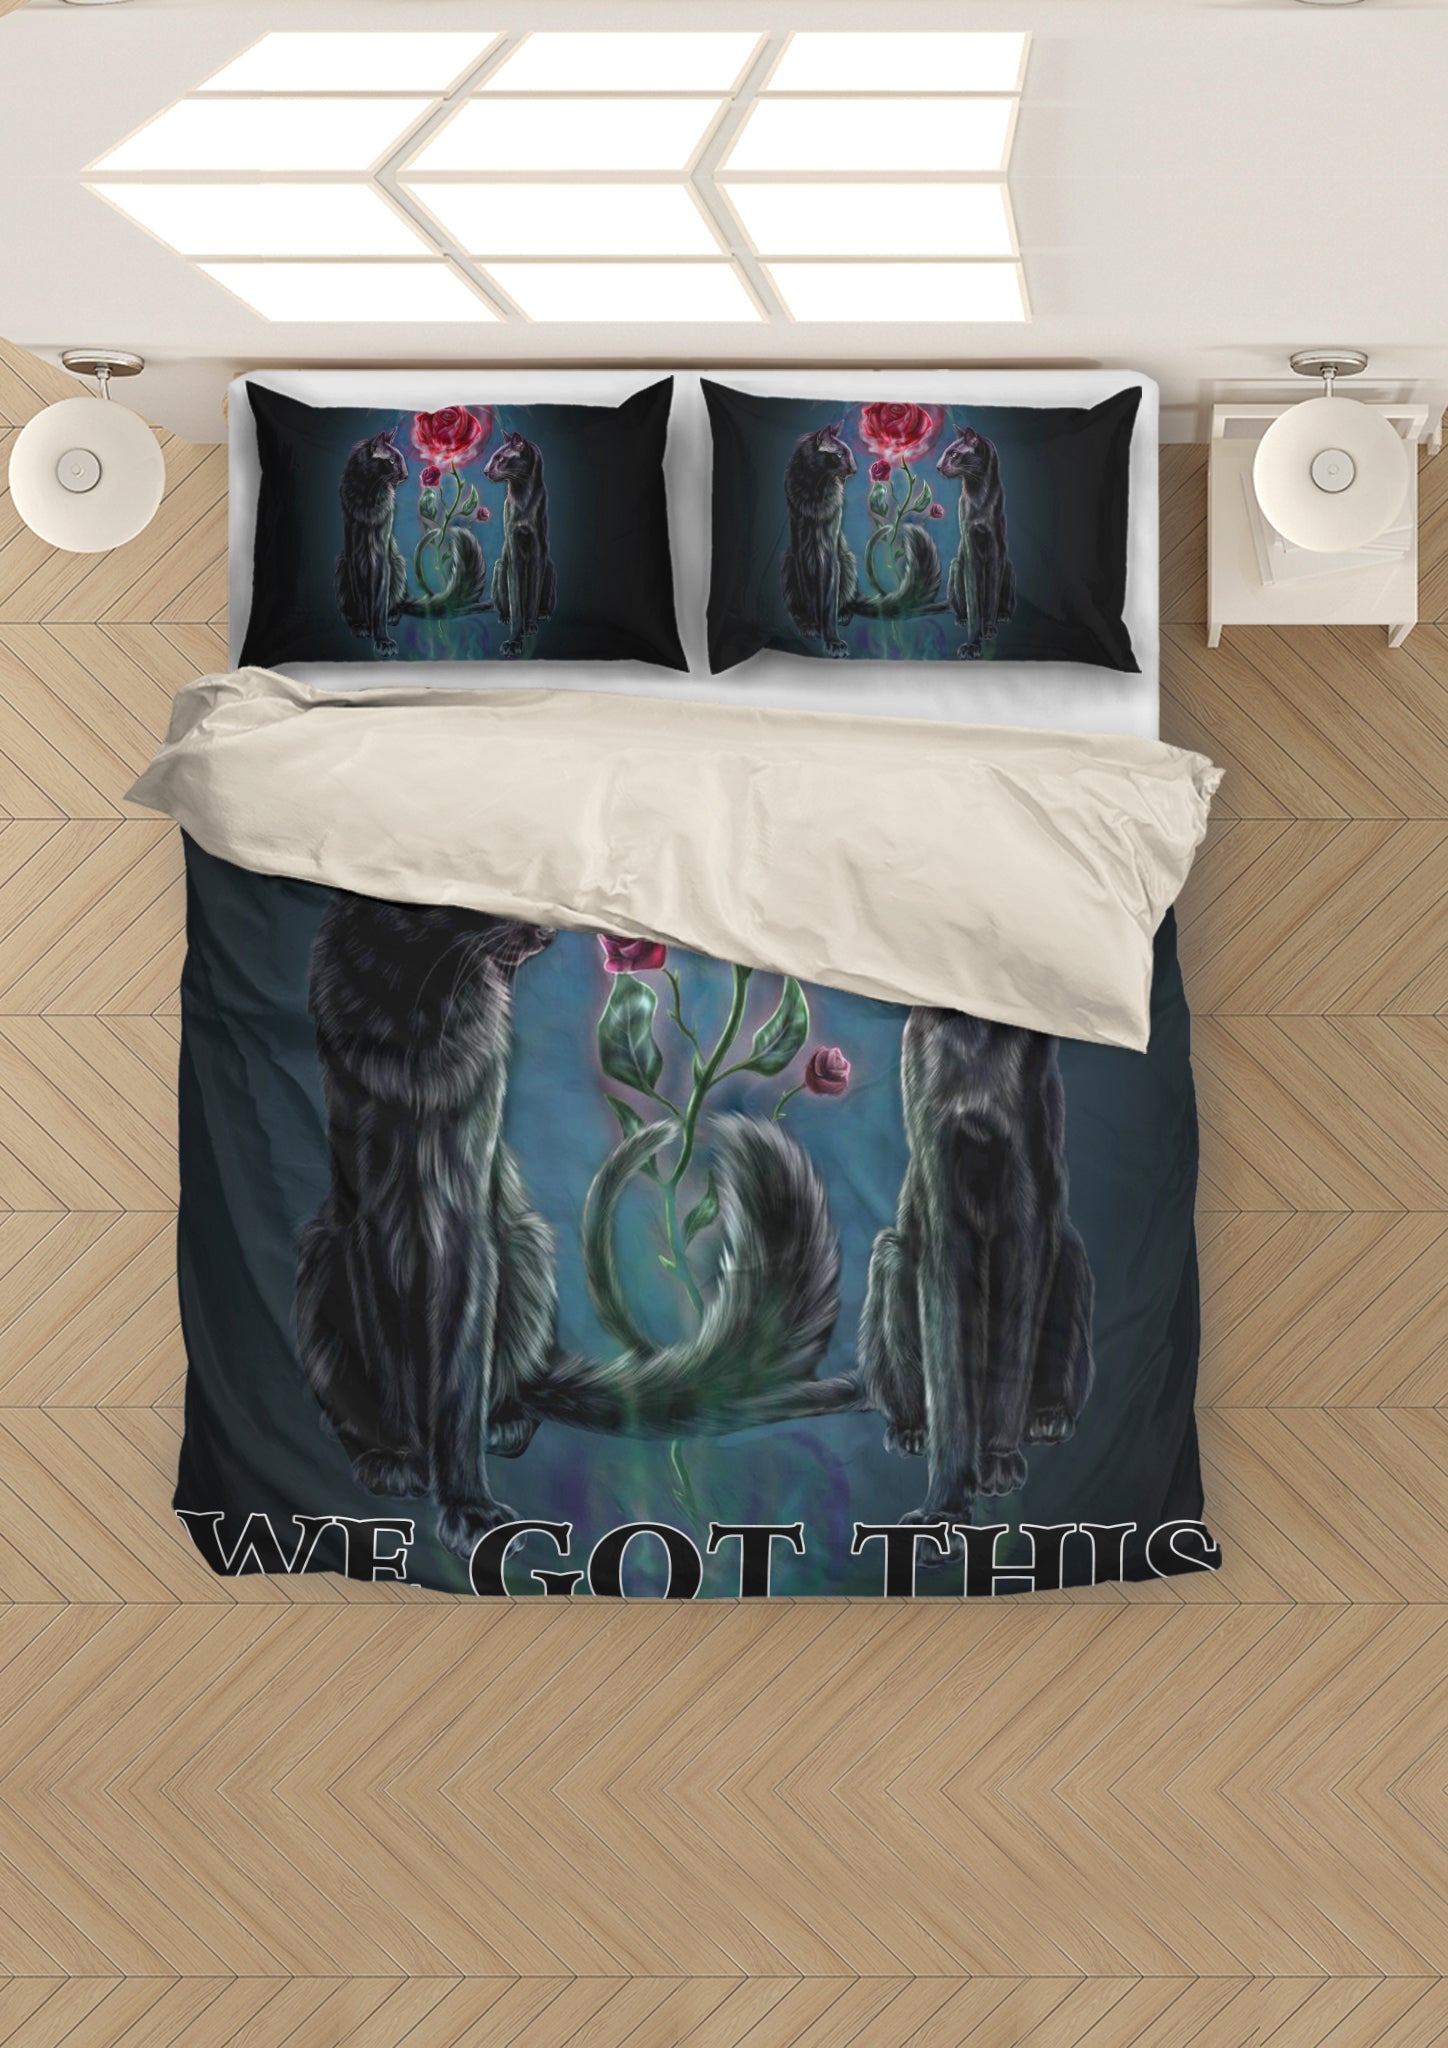 Black Cat Dark You and me we got this Bedding set Gift for you, gift for her, gift for him, gift for family, gift for lover, gift for friends